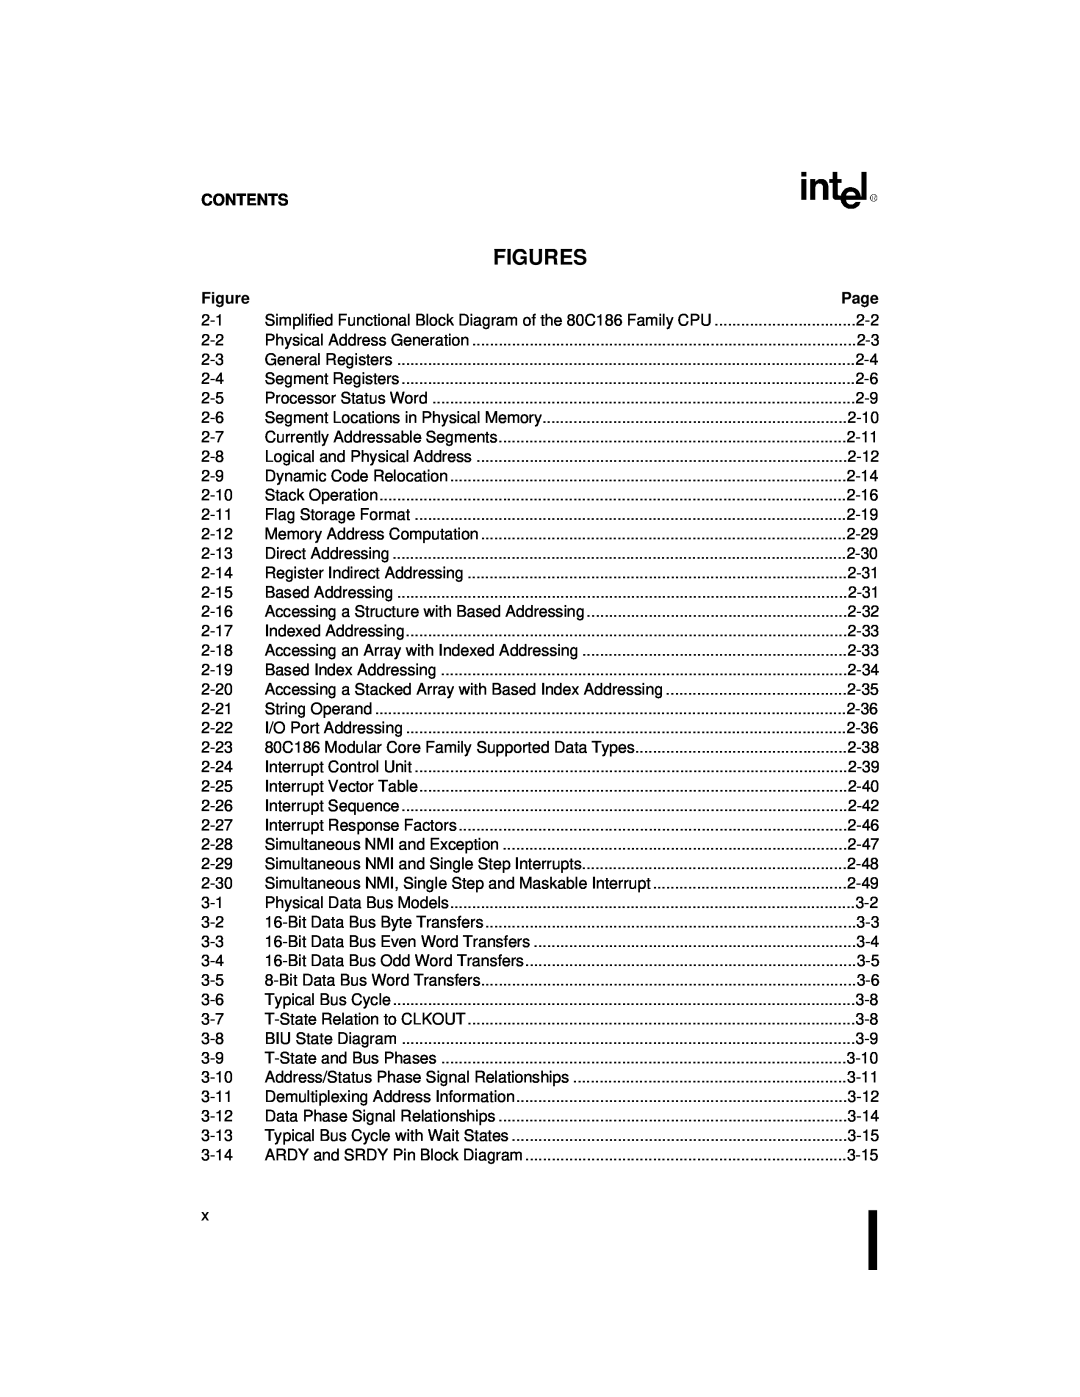 Intel 80C186XL, 80C188XL user manual Figures, Contents, Page 